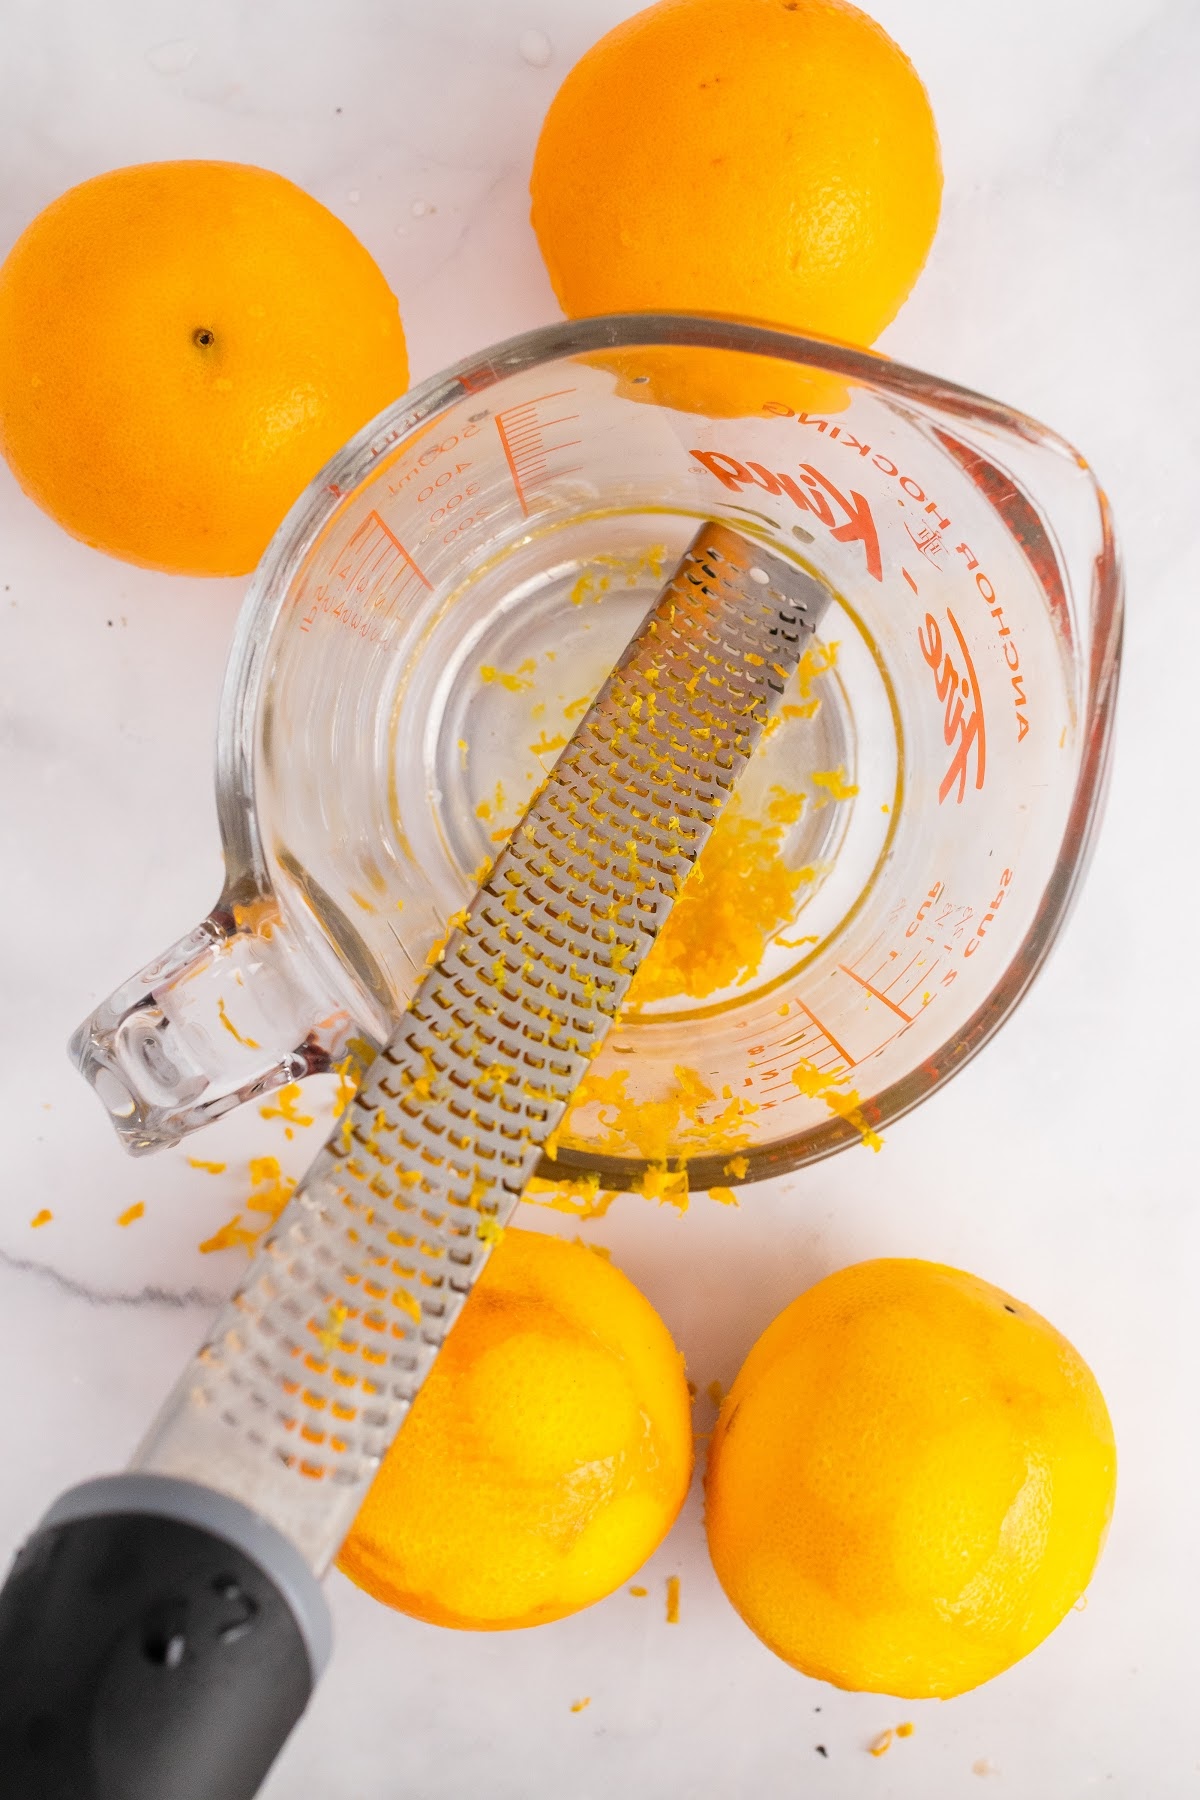 Glass measuring cup filled with orange zest with a microplane sitting on top of it with zested oranges and whole oranges around it.